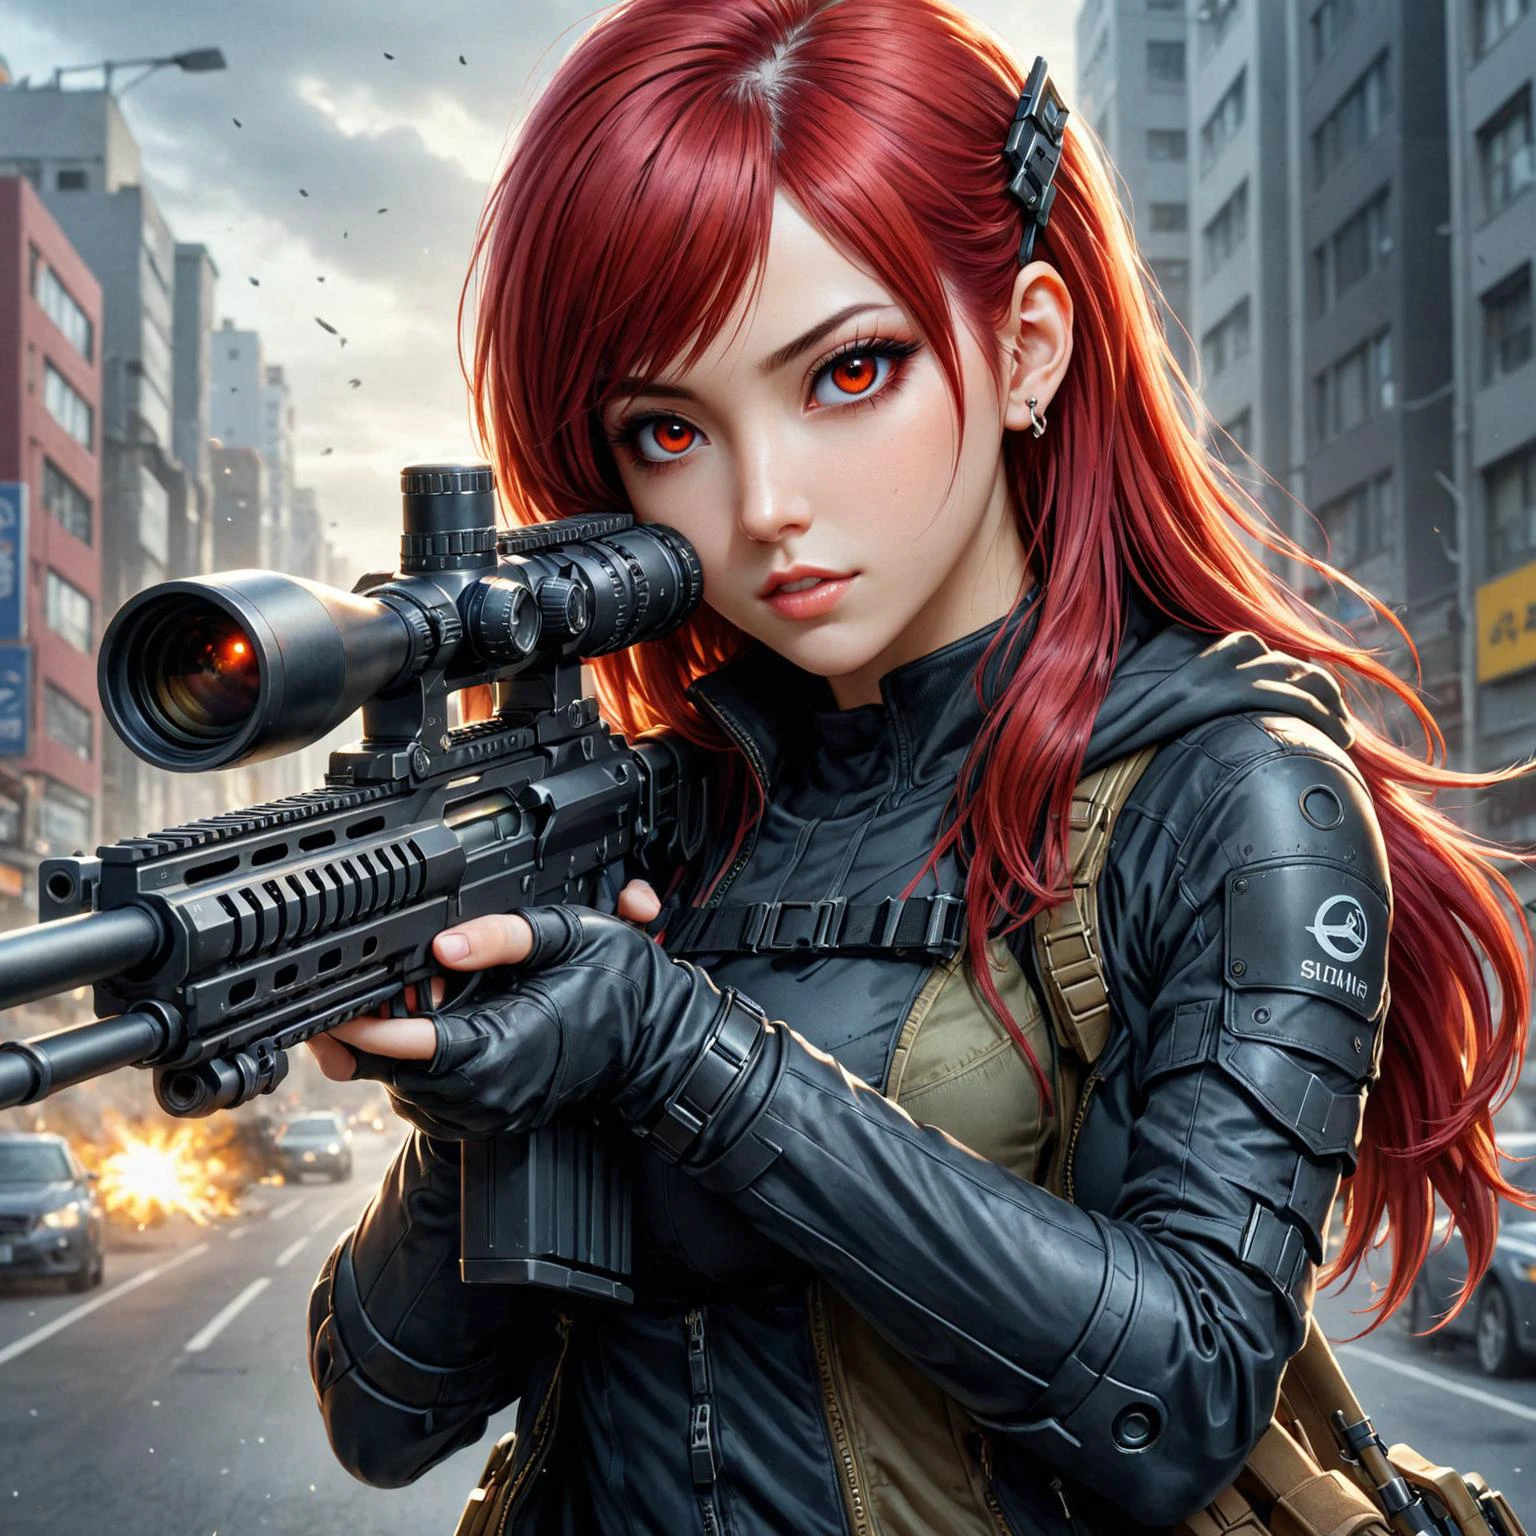 by Alex Alemany and Harumi Hironaka in the style of Yuumei, using a sniper rifle Brazilian, red_haired|} 